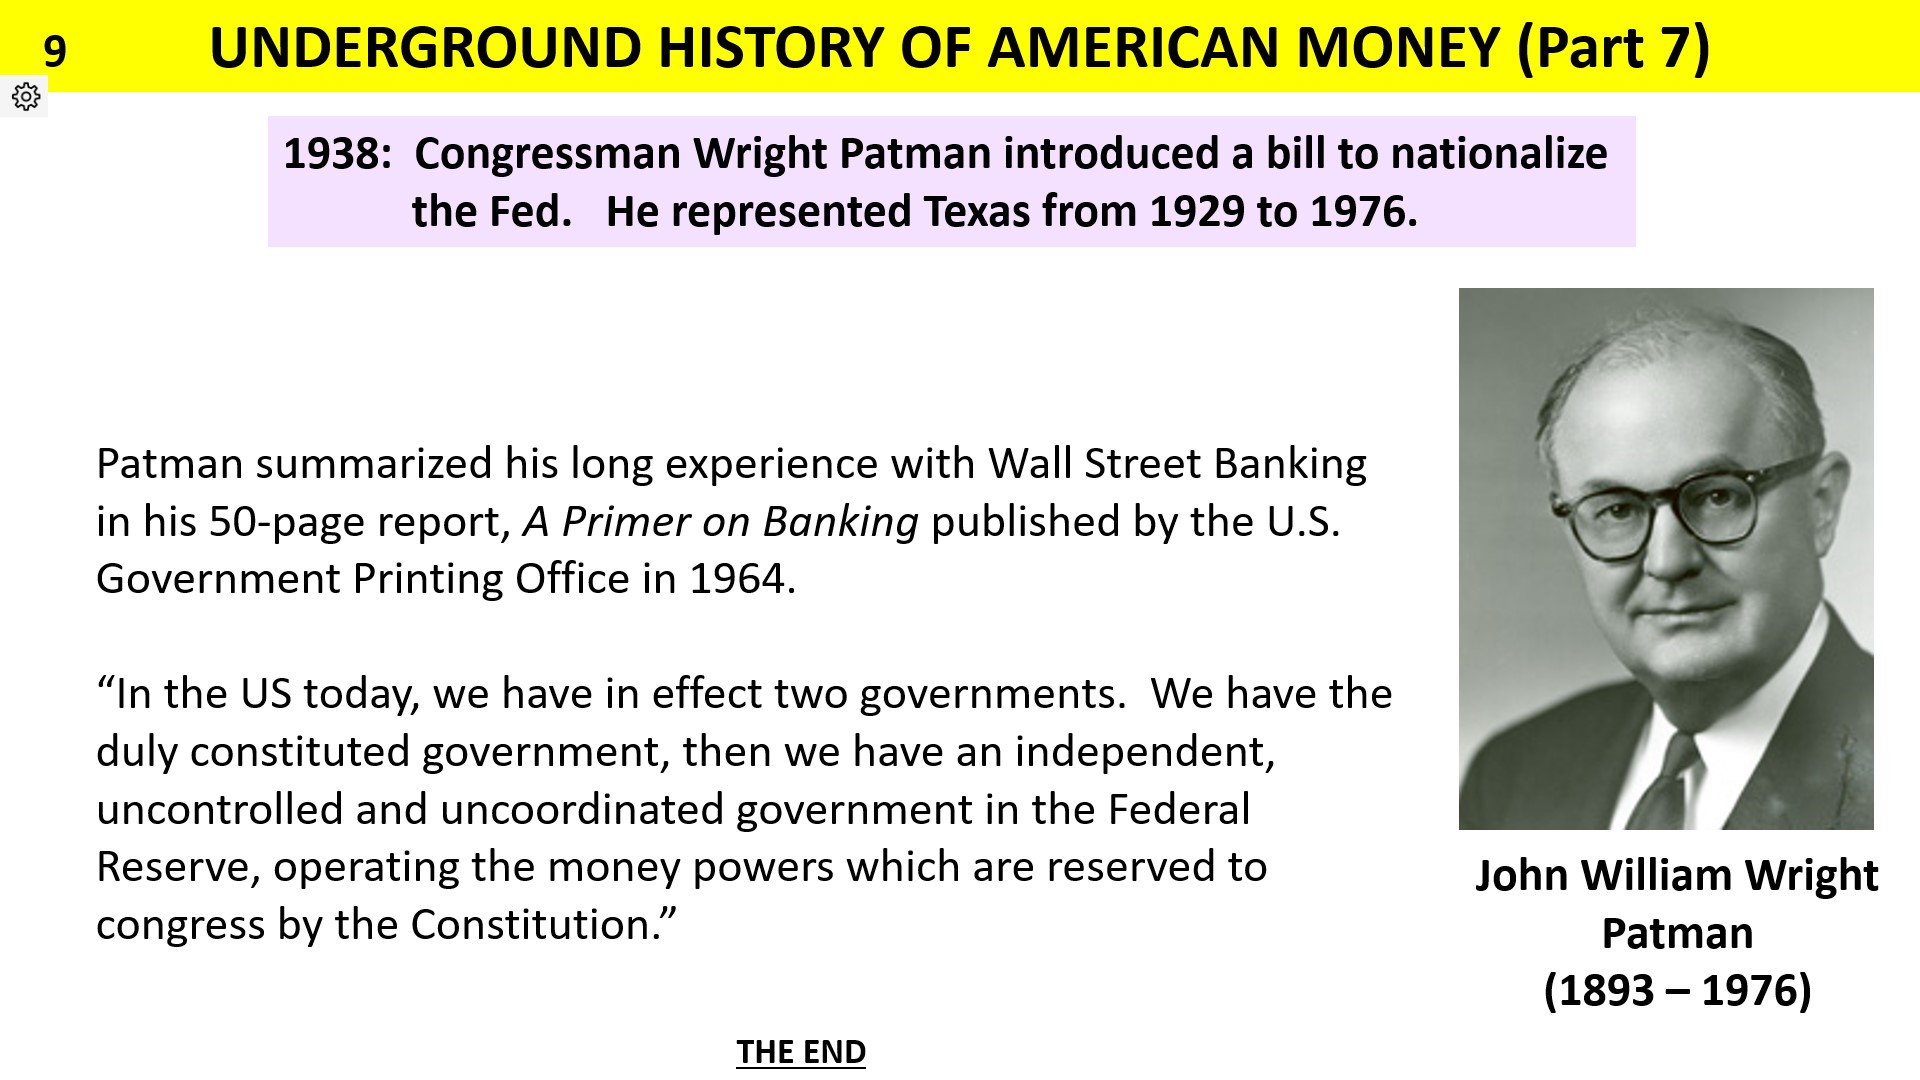 In 1938, Congressman Wright Patman introduced a bill to nationalise the Federal Reserve.